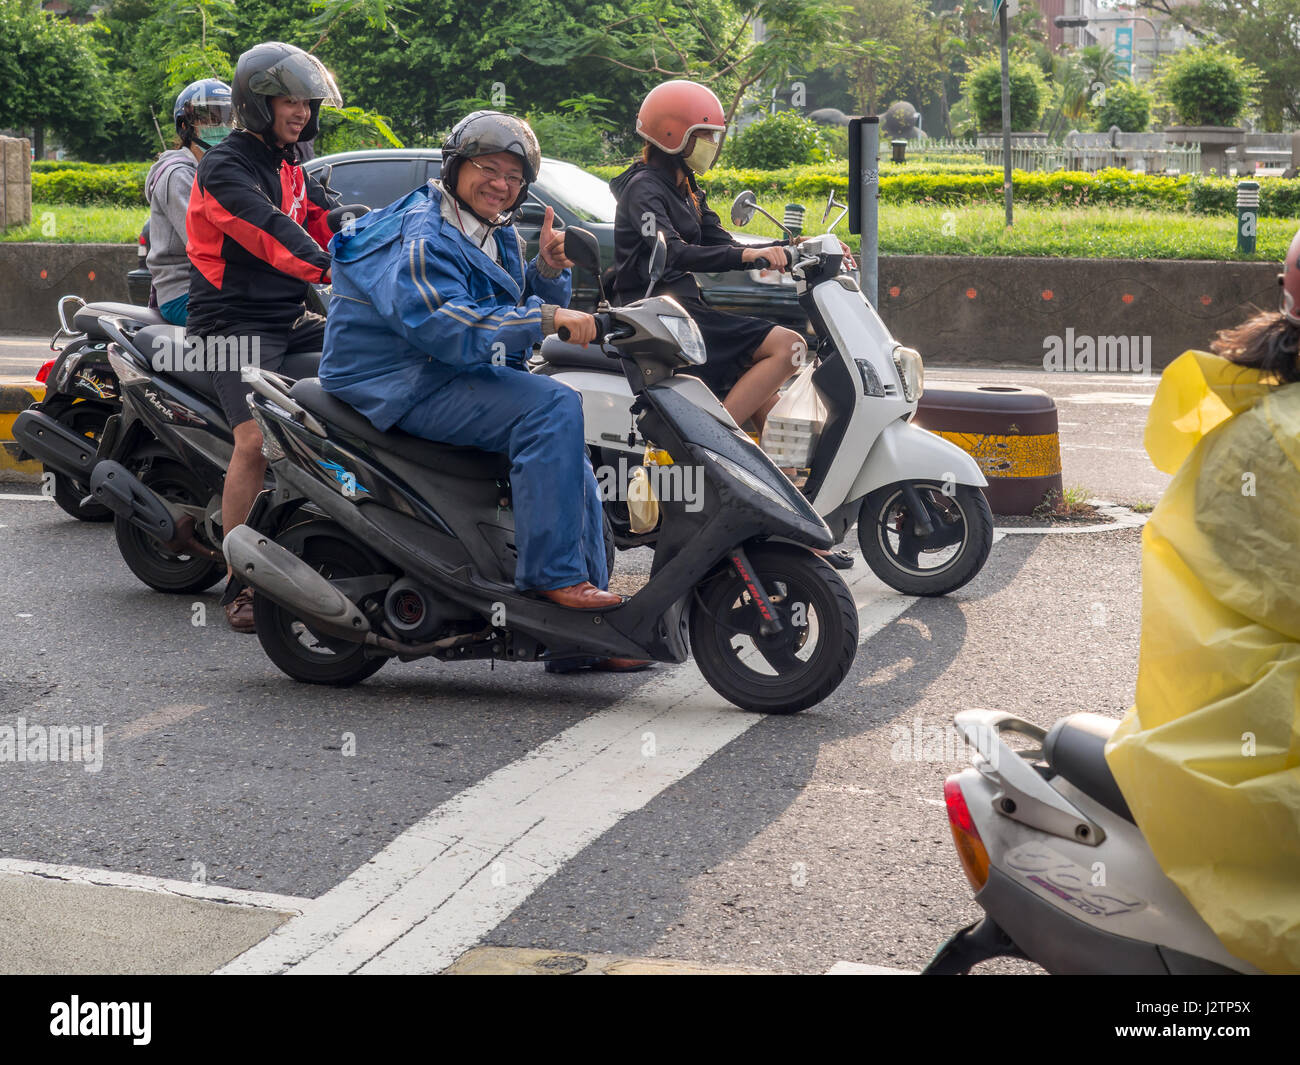 Tainan, Taiwan - October 11, 2016: The people of Taiwan on scooters Stock Photo